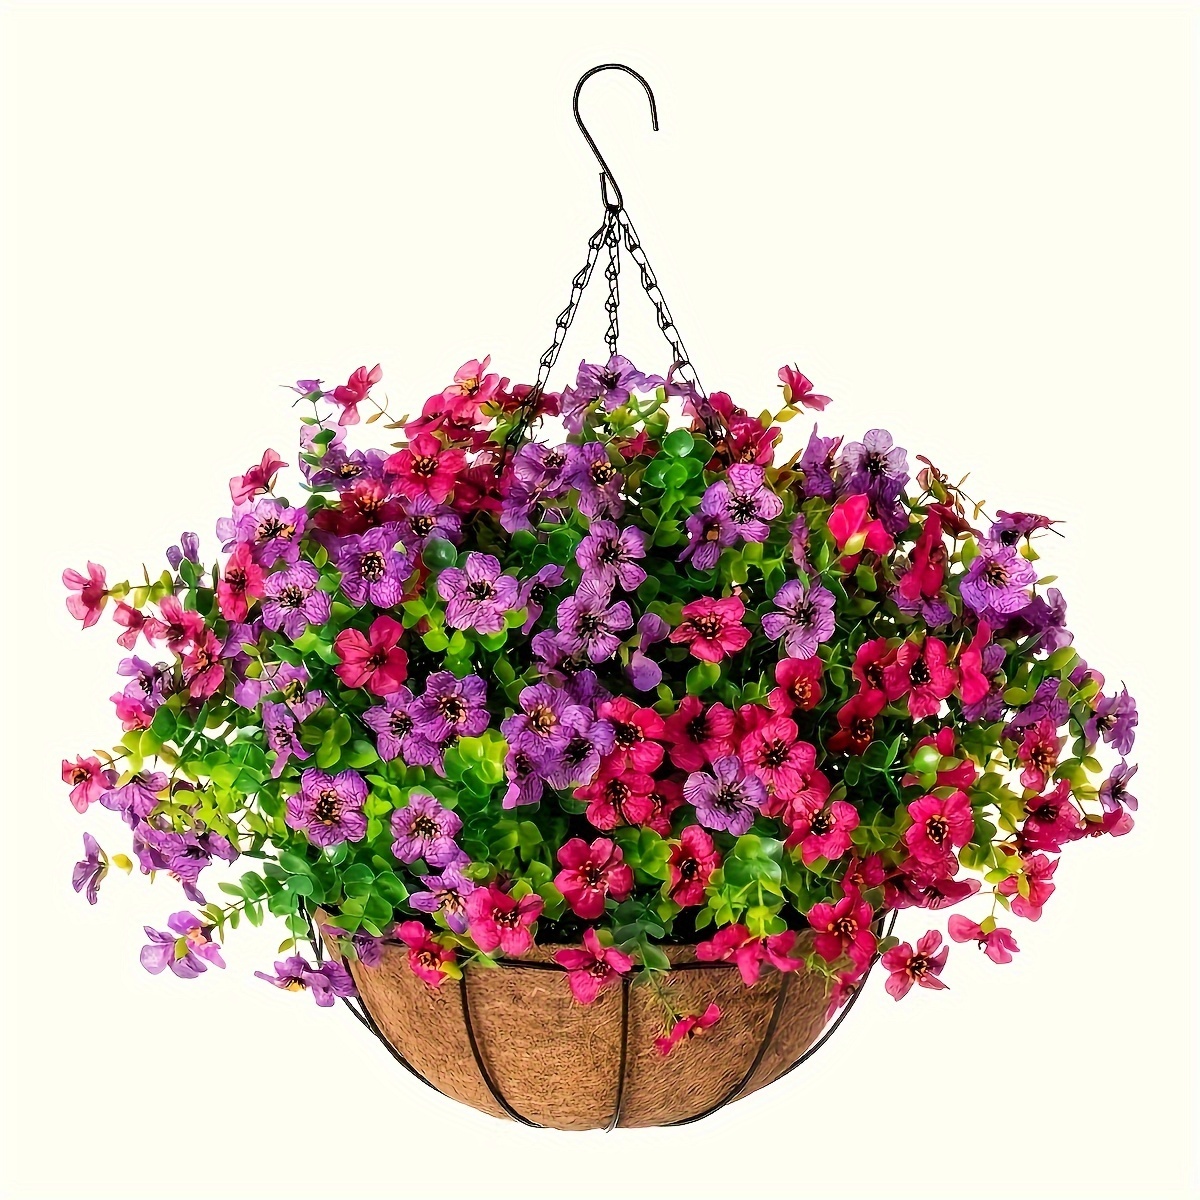 Classic Style Artificial Hanging Flower Basket with Coconut Lining, Plastic Daisies for Indoor and Outdoor Decor, No Electricity Required - 1pc